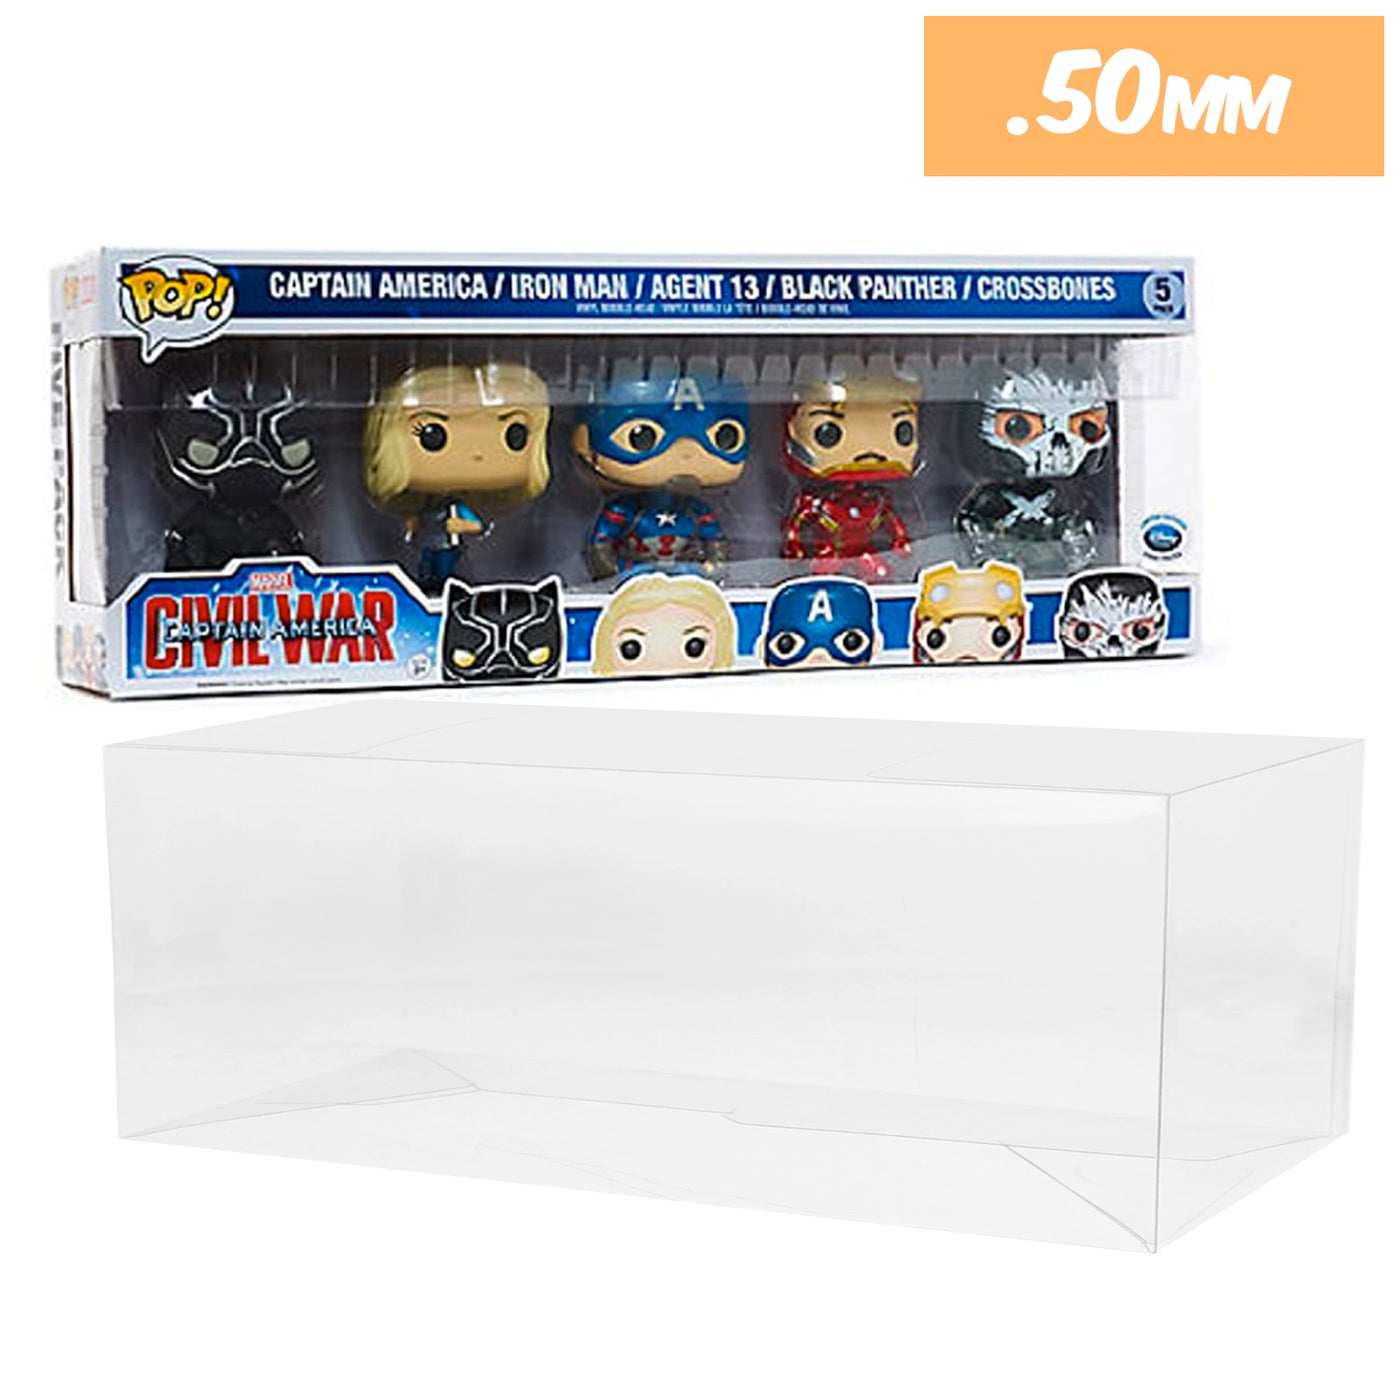 civil war 5 pack best funko pop protectors thick strong uv scratch flat top stack vinyl display geek plastic shield vaulted eco armor fits collect protect display case kollector protector